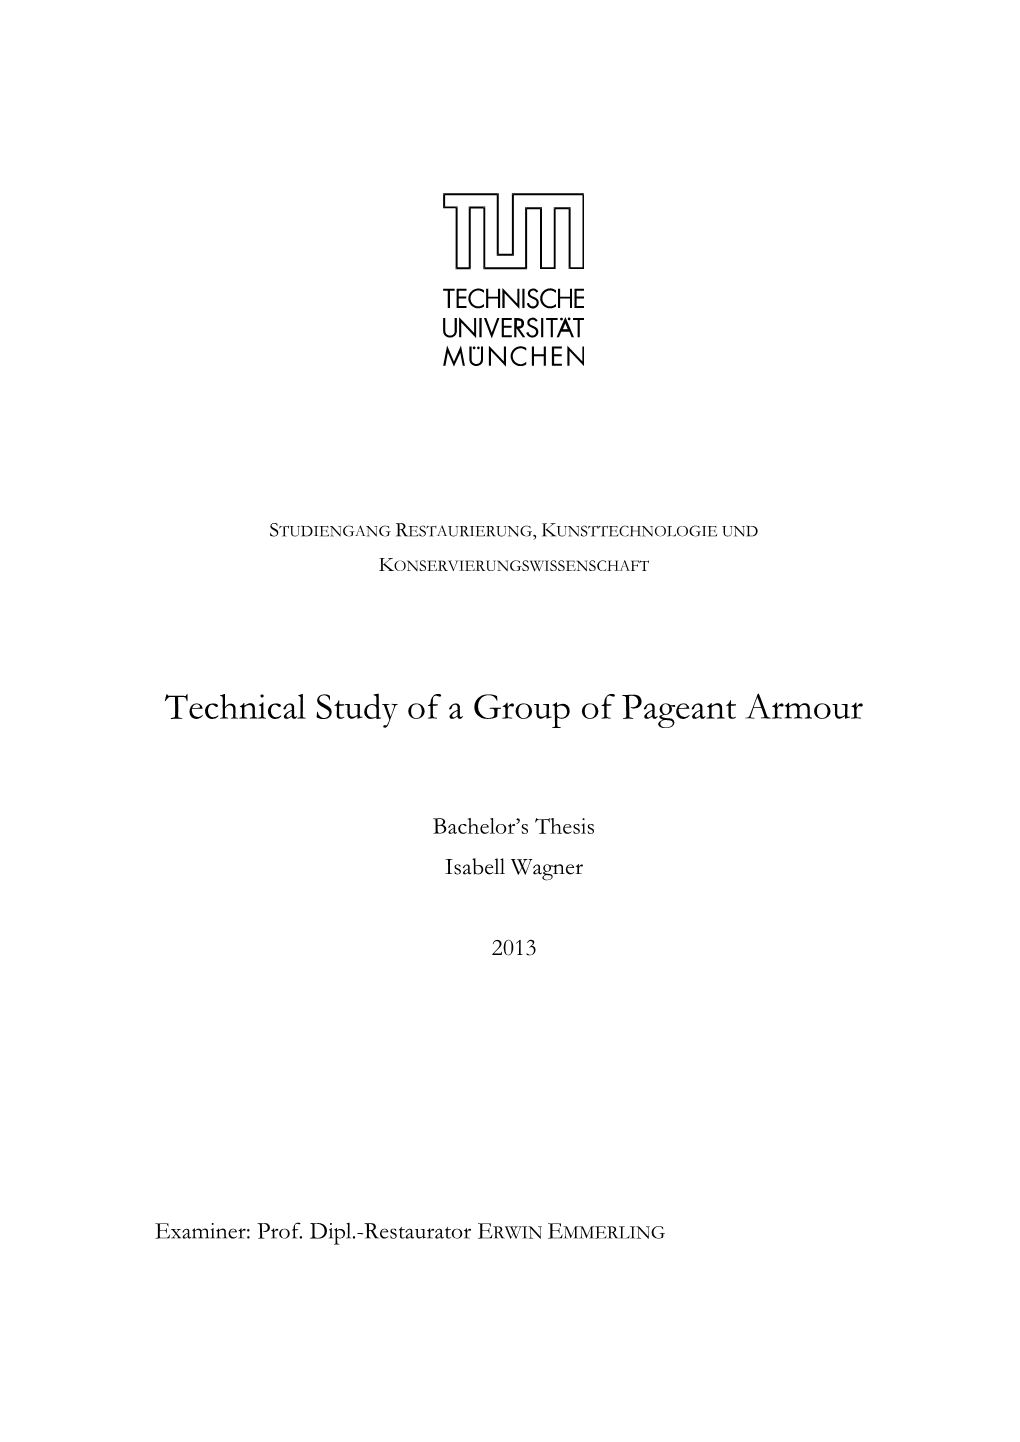 Technical Study of a Group of Pageant Armour